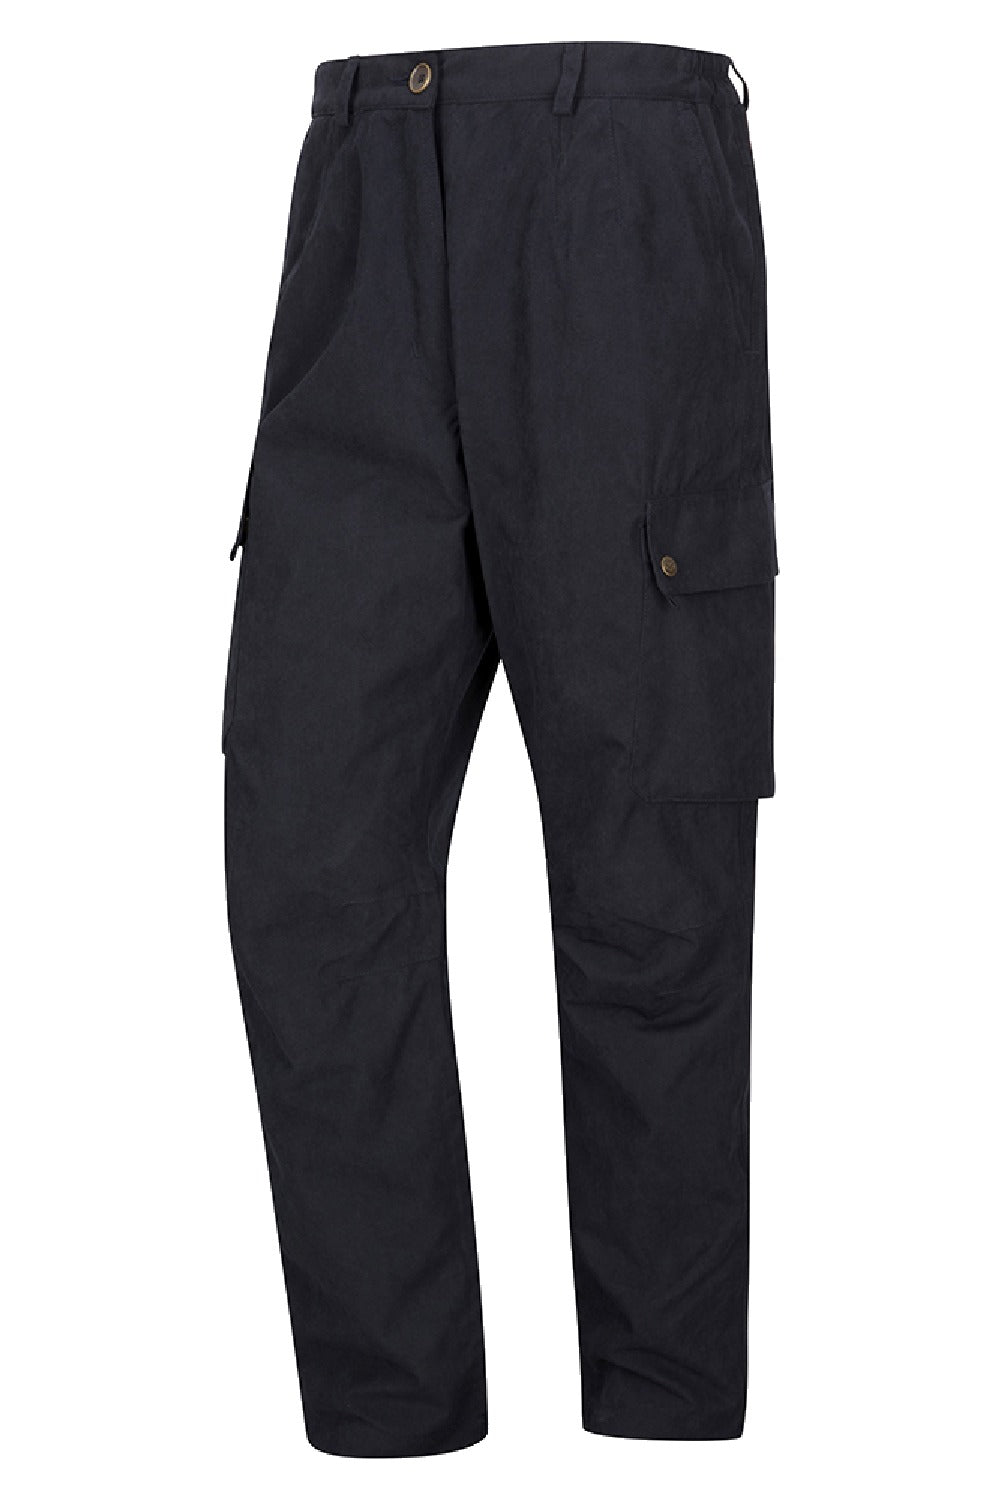 Hoggs of Fife Struther Field Trousers- Navy 